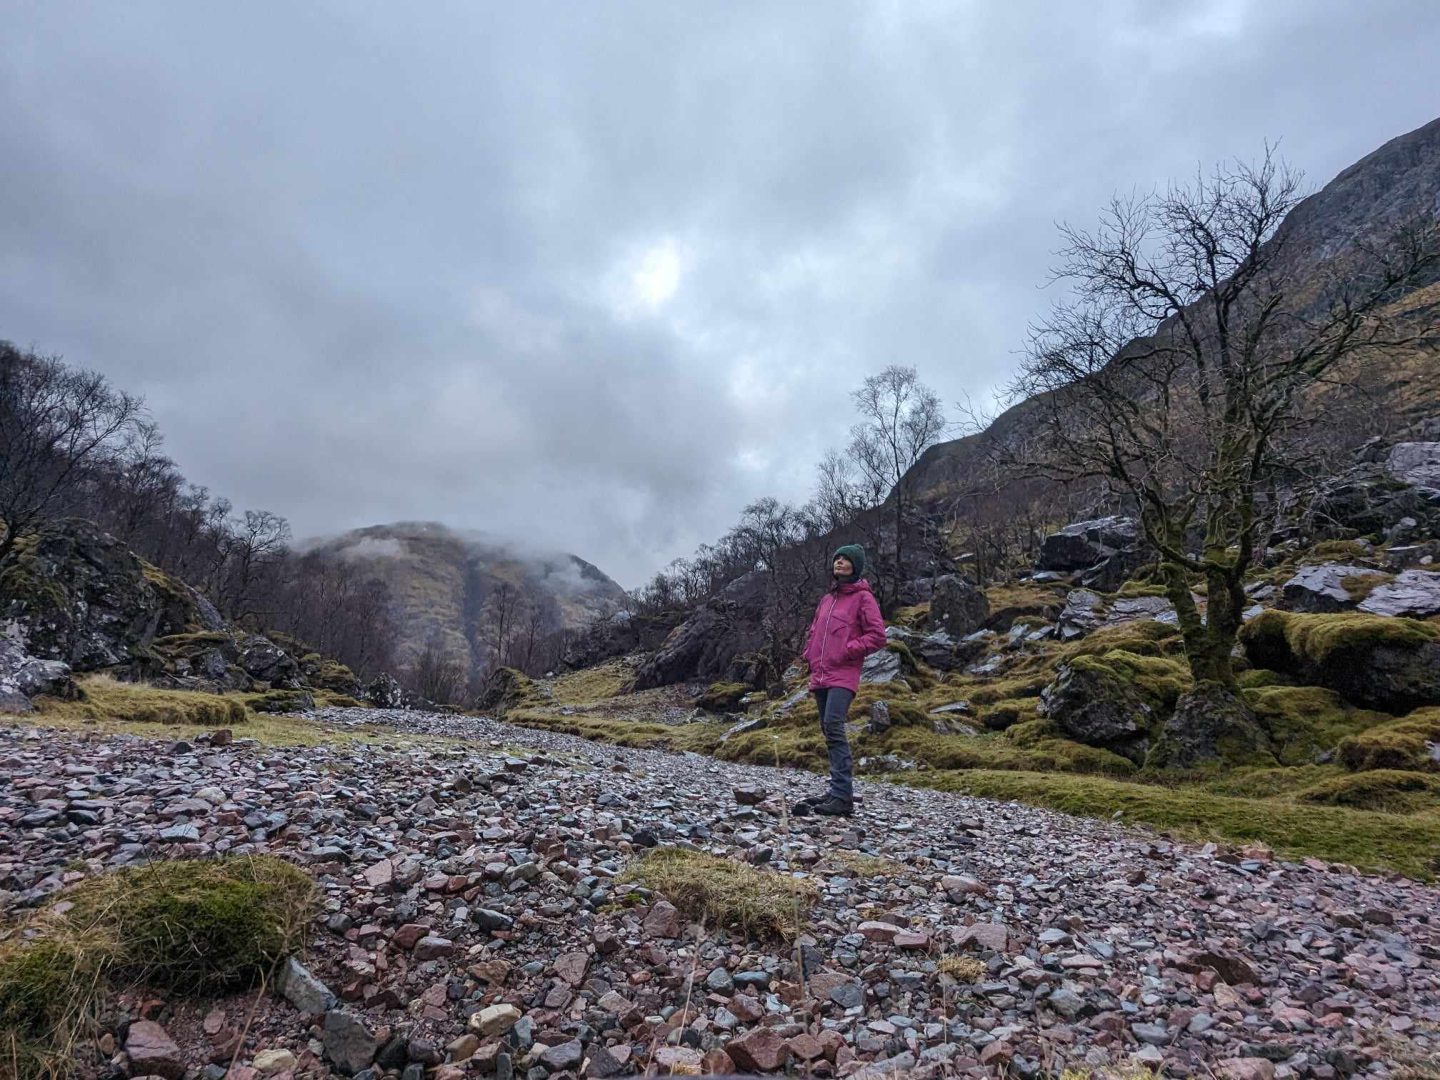 Gayle in the gloaming at the Lost Valley of Glencoe.